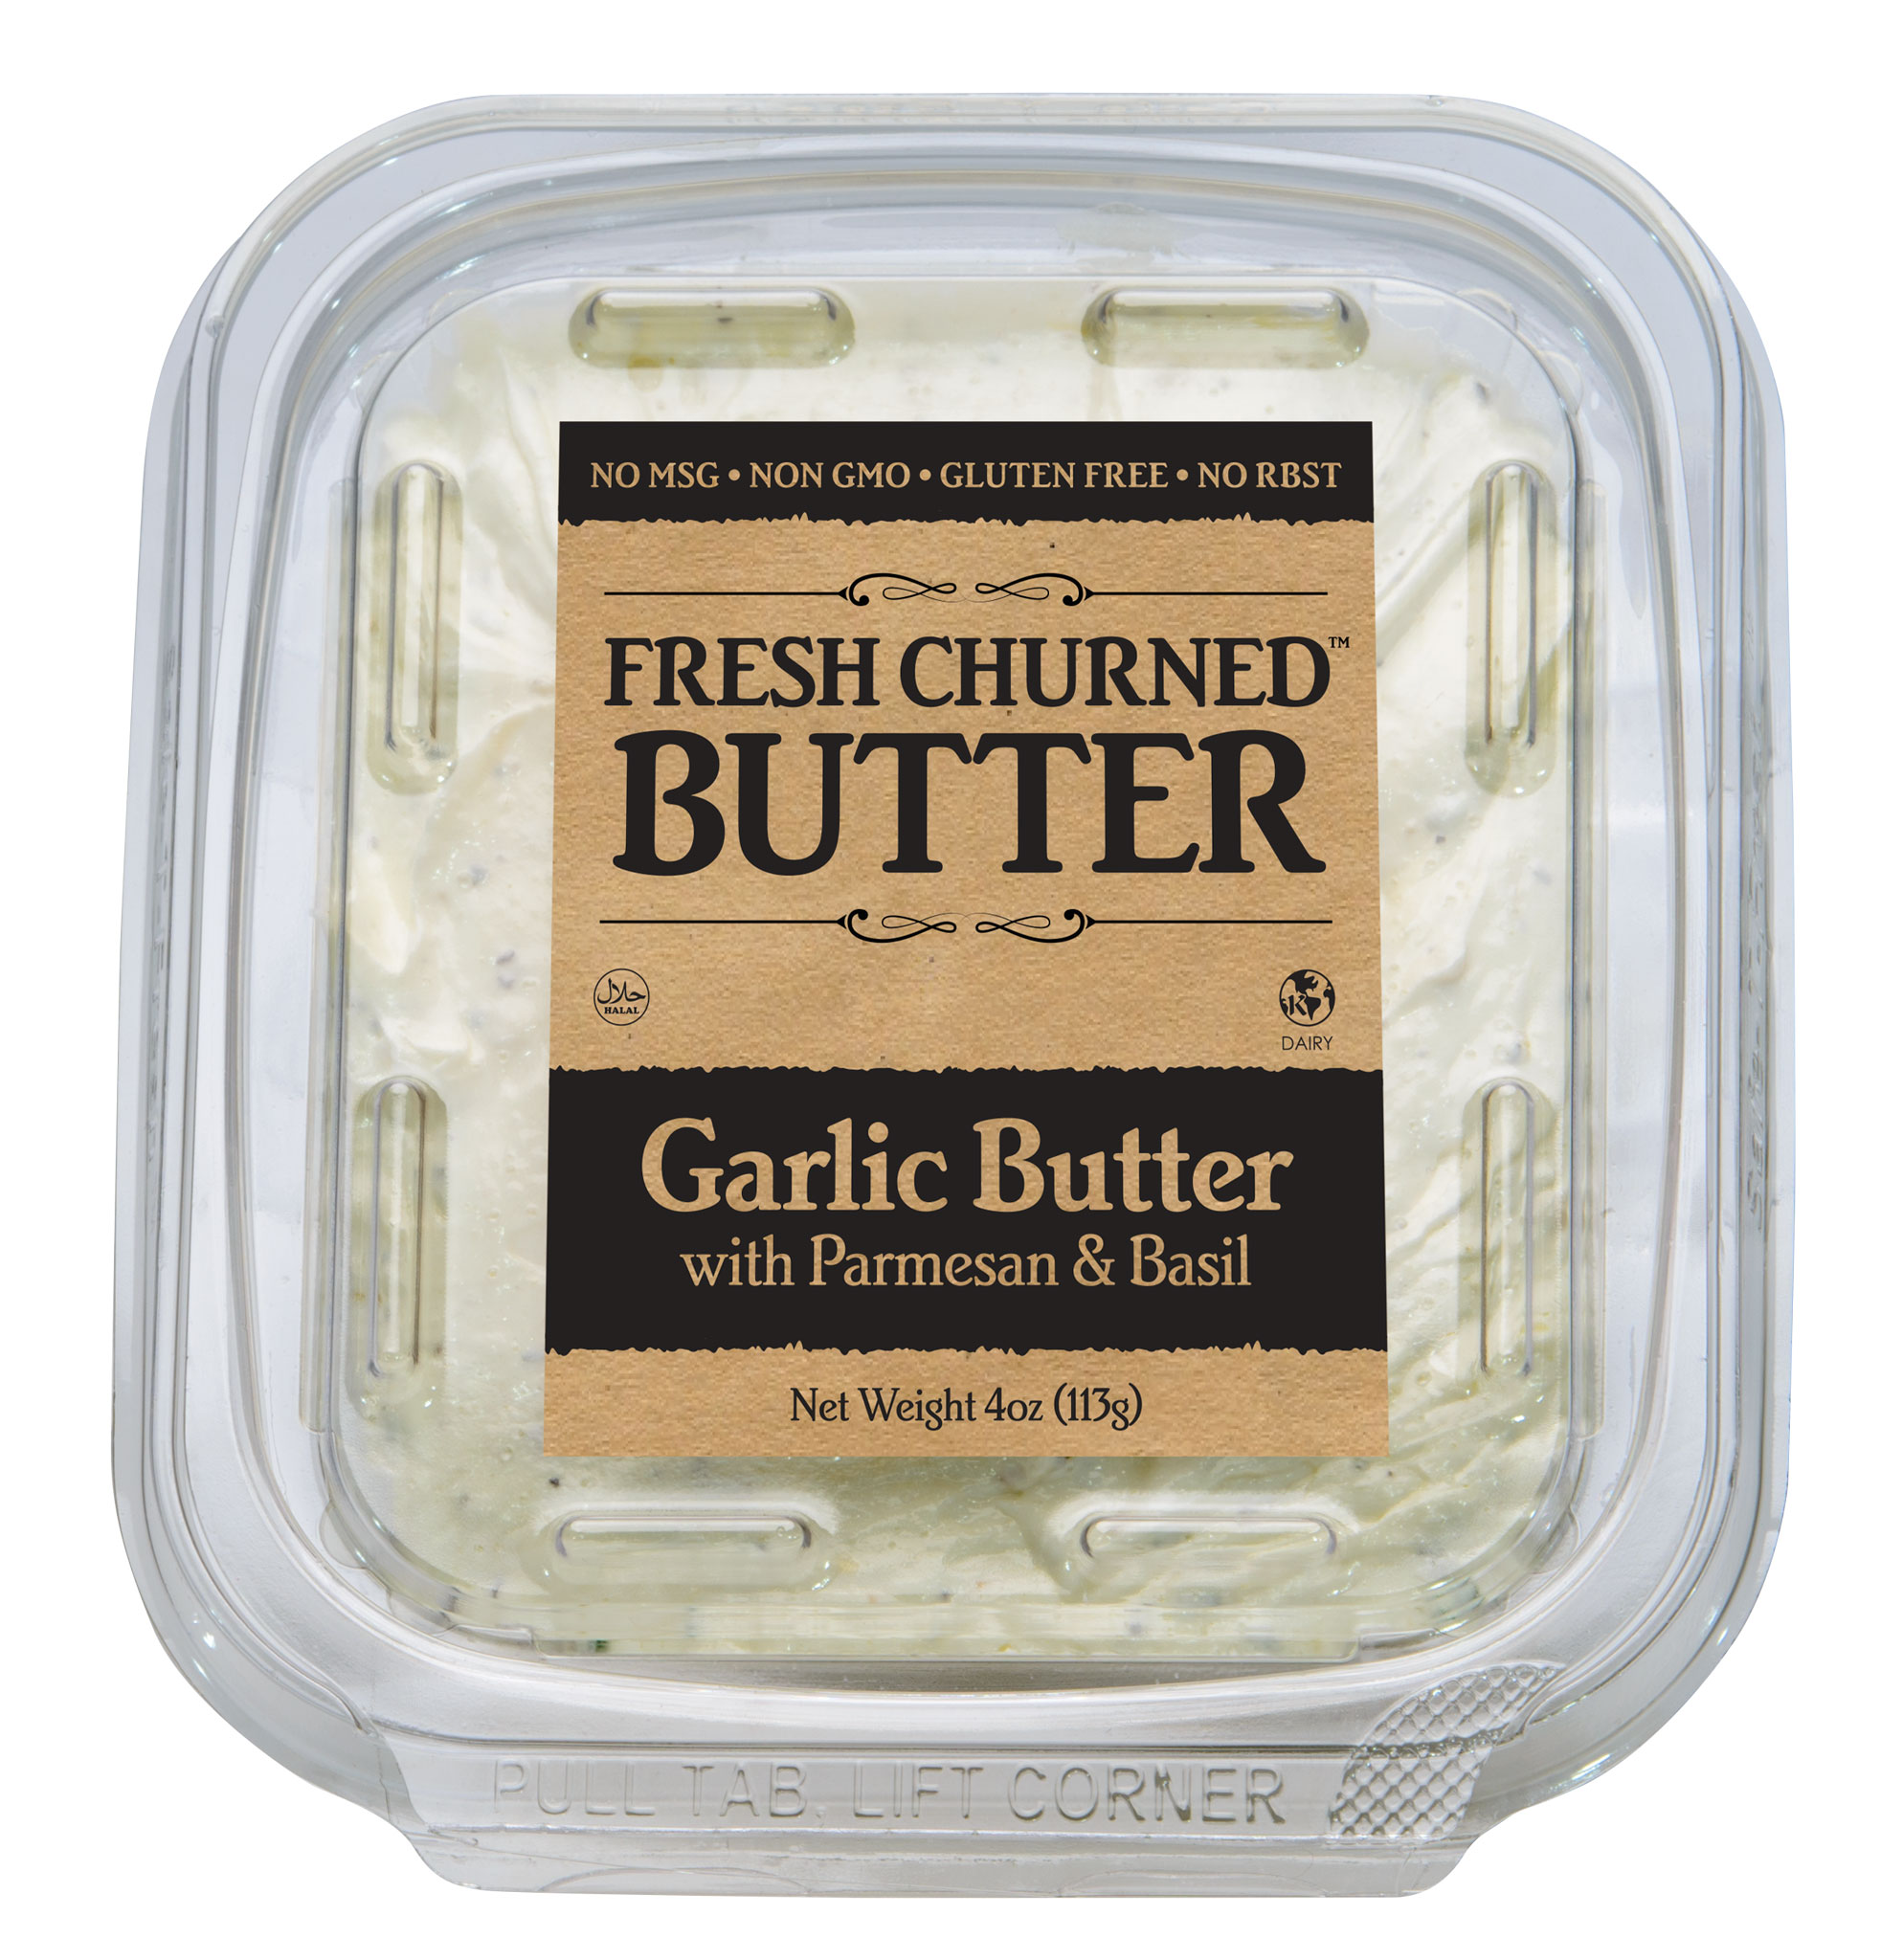 Fresh Churned Shelf Stable Real Garlic Butter by DFS Gourmet Foods